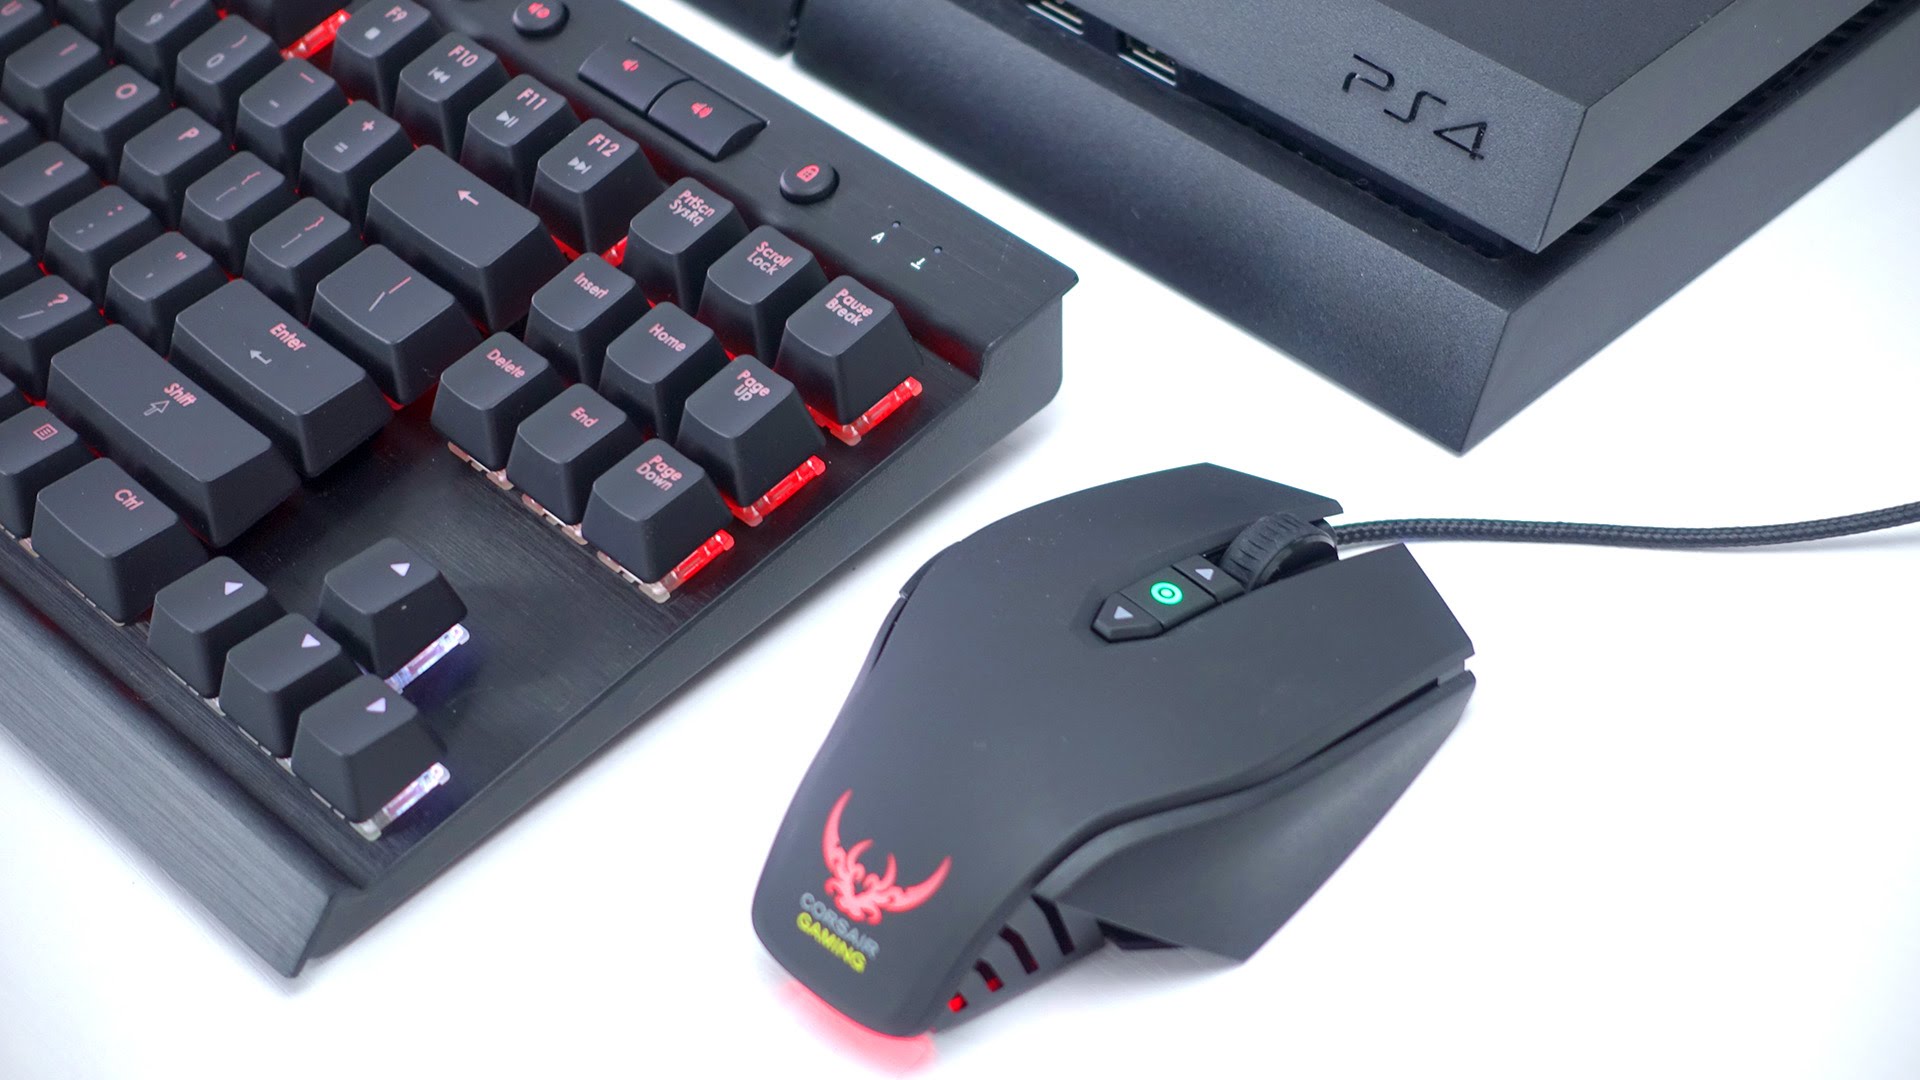 How To Connect a Mouse and Keyboard to Your PlayStation 4